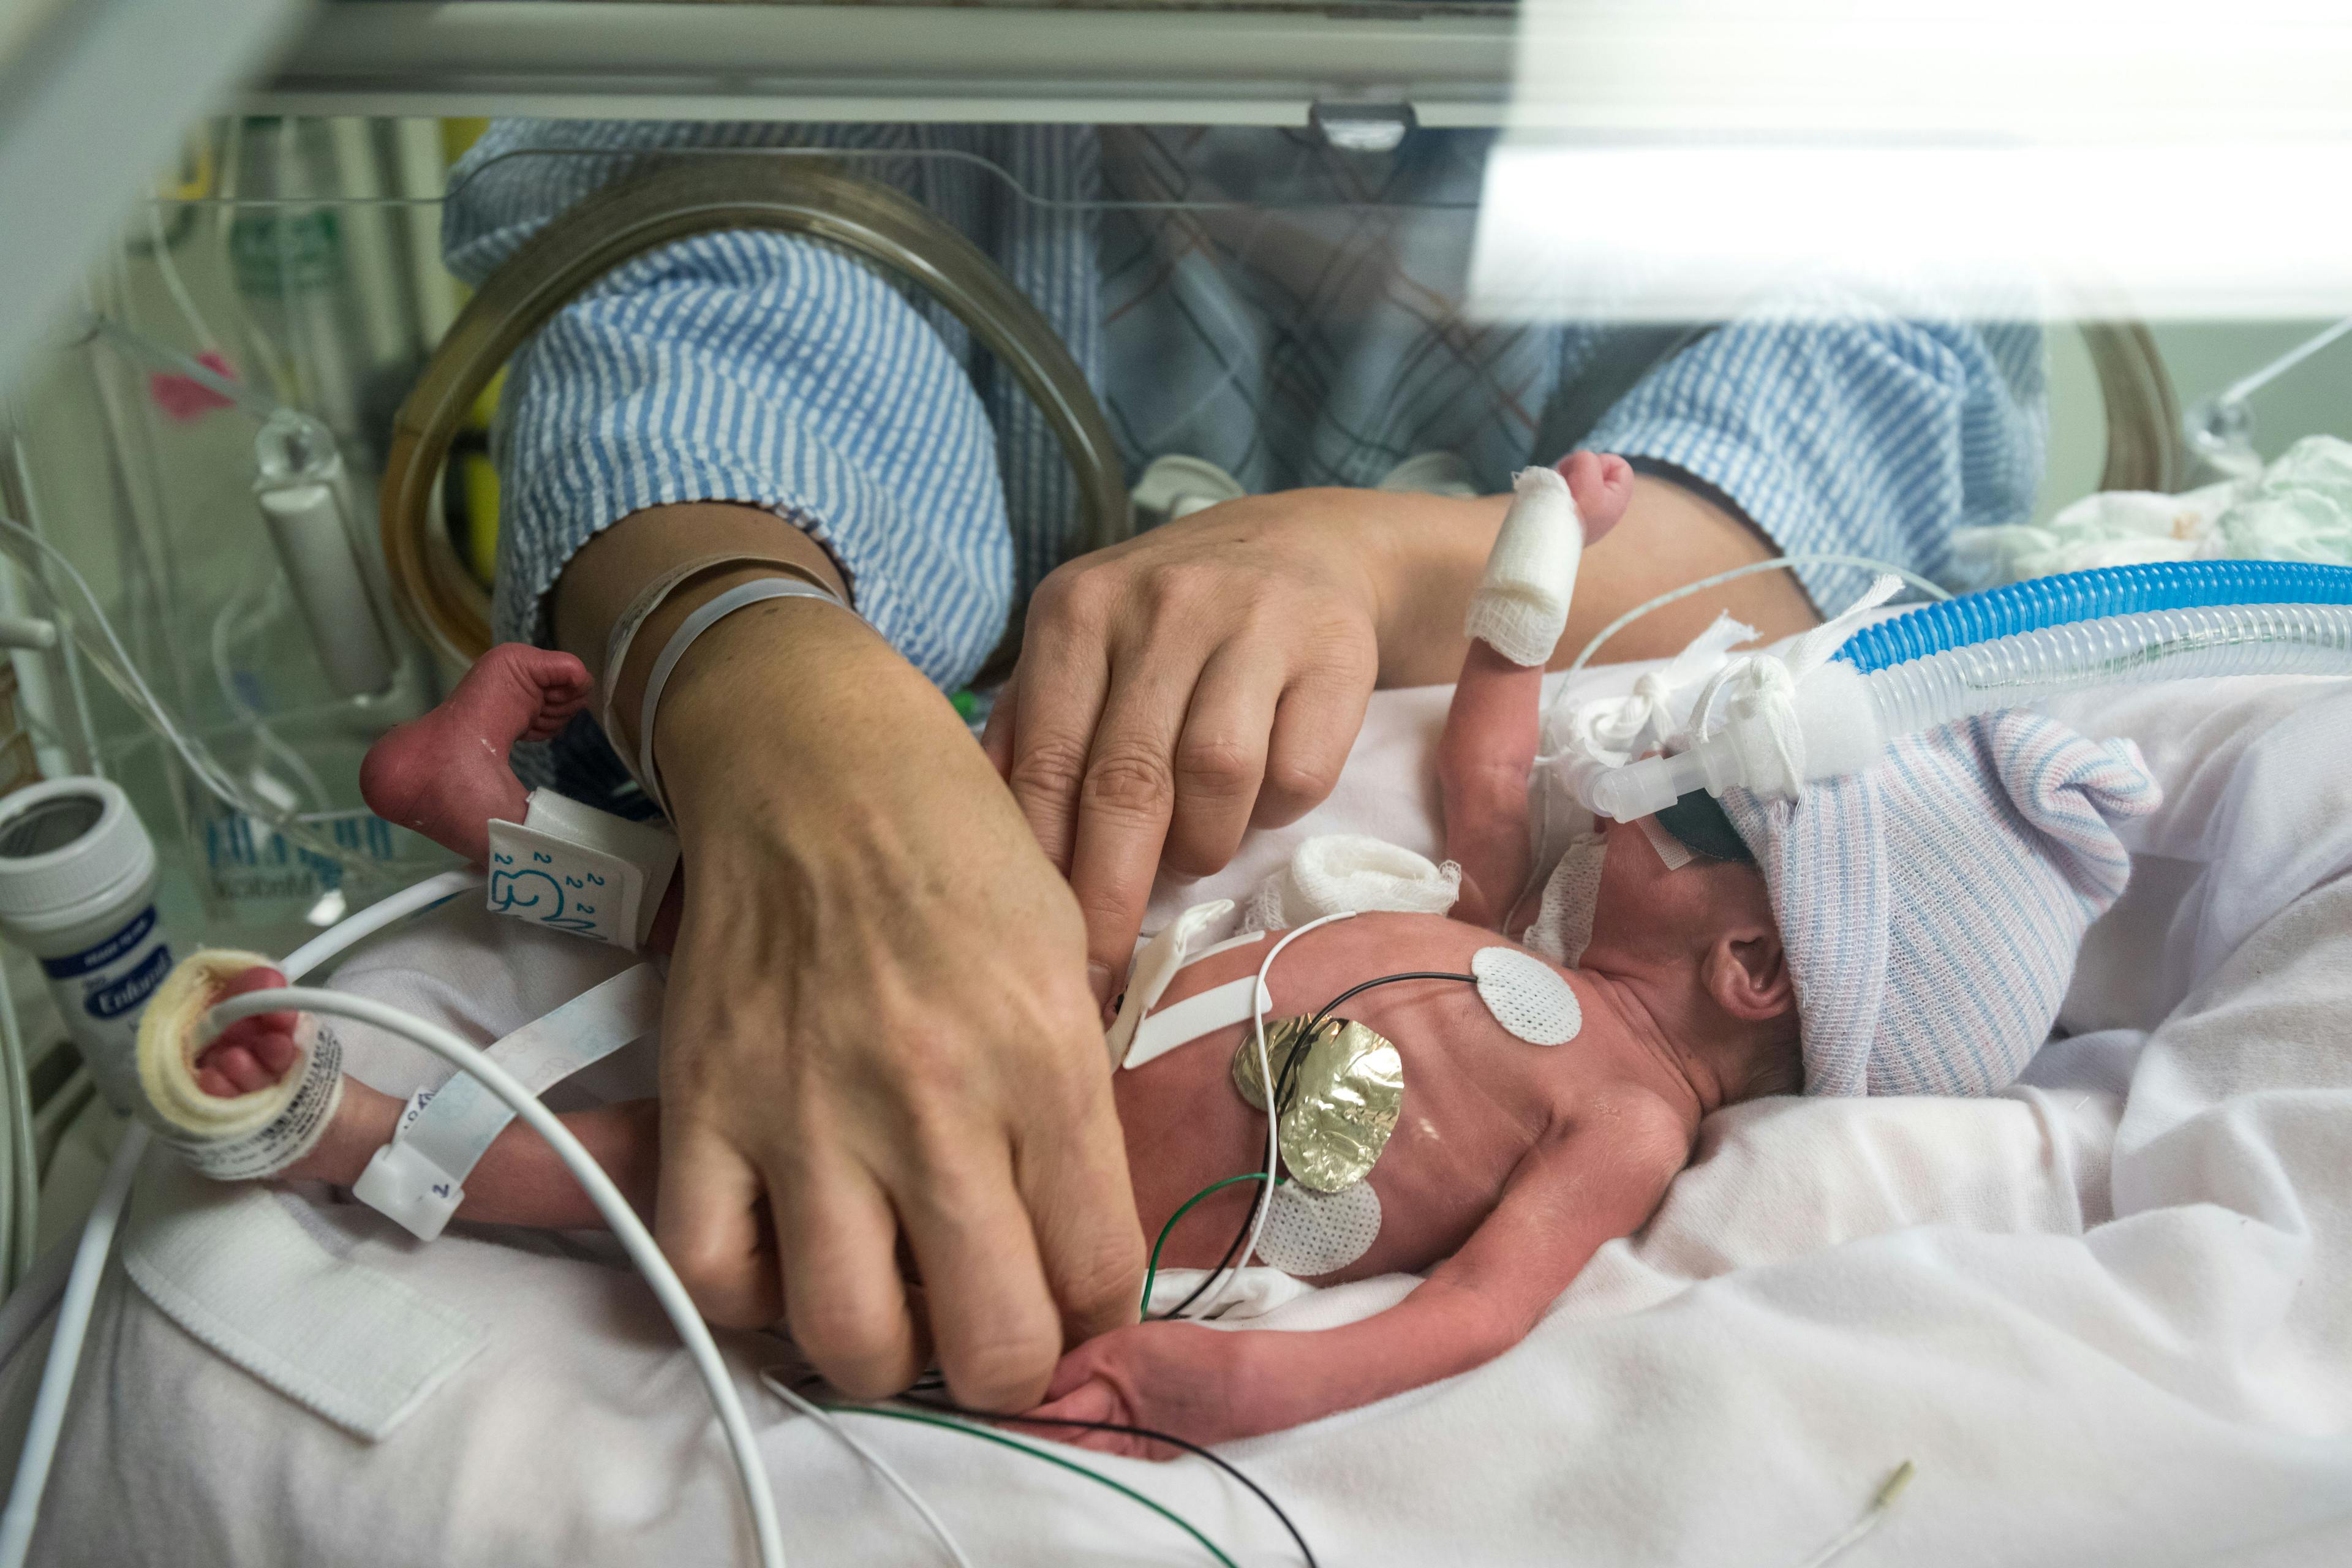 March of Dimes launches new preterm birth research center at UCSF